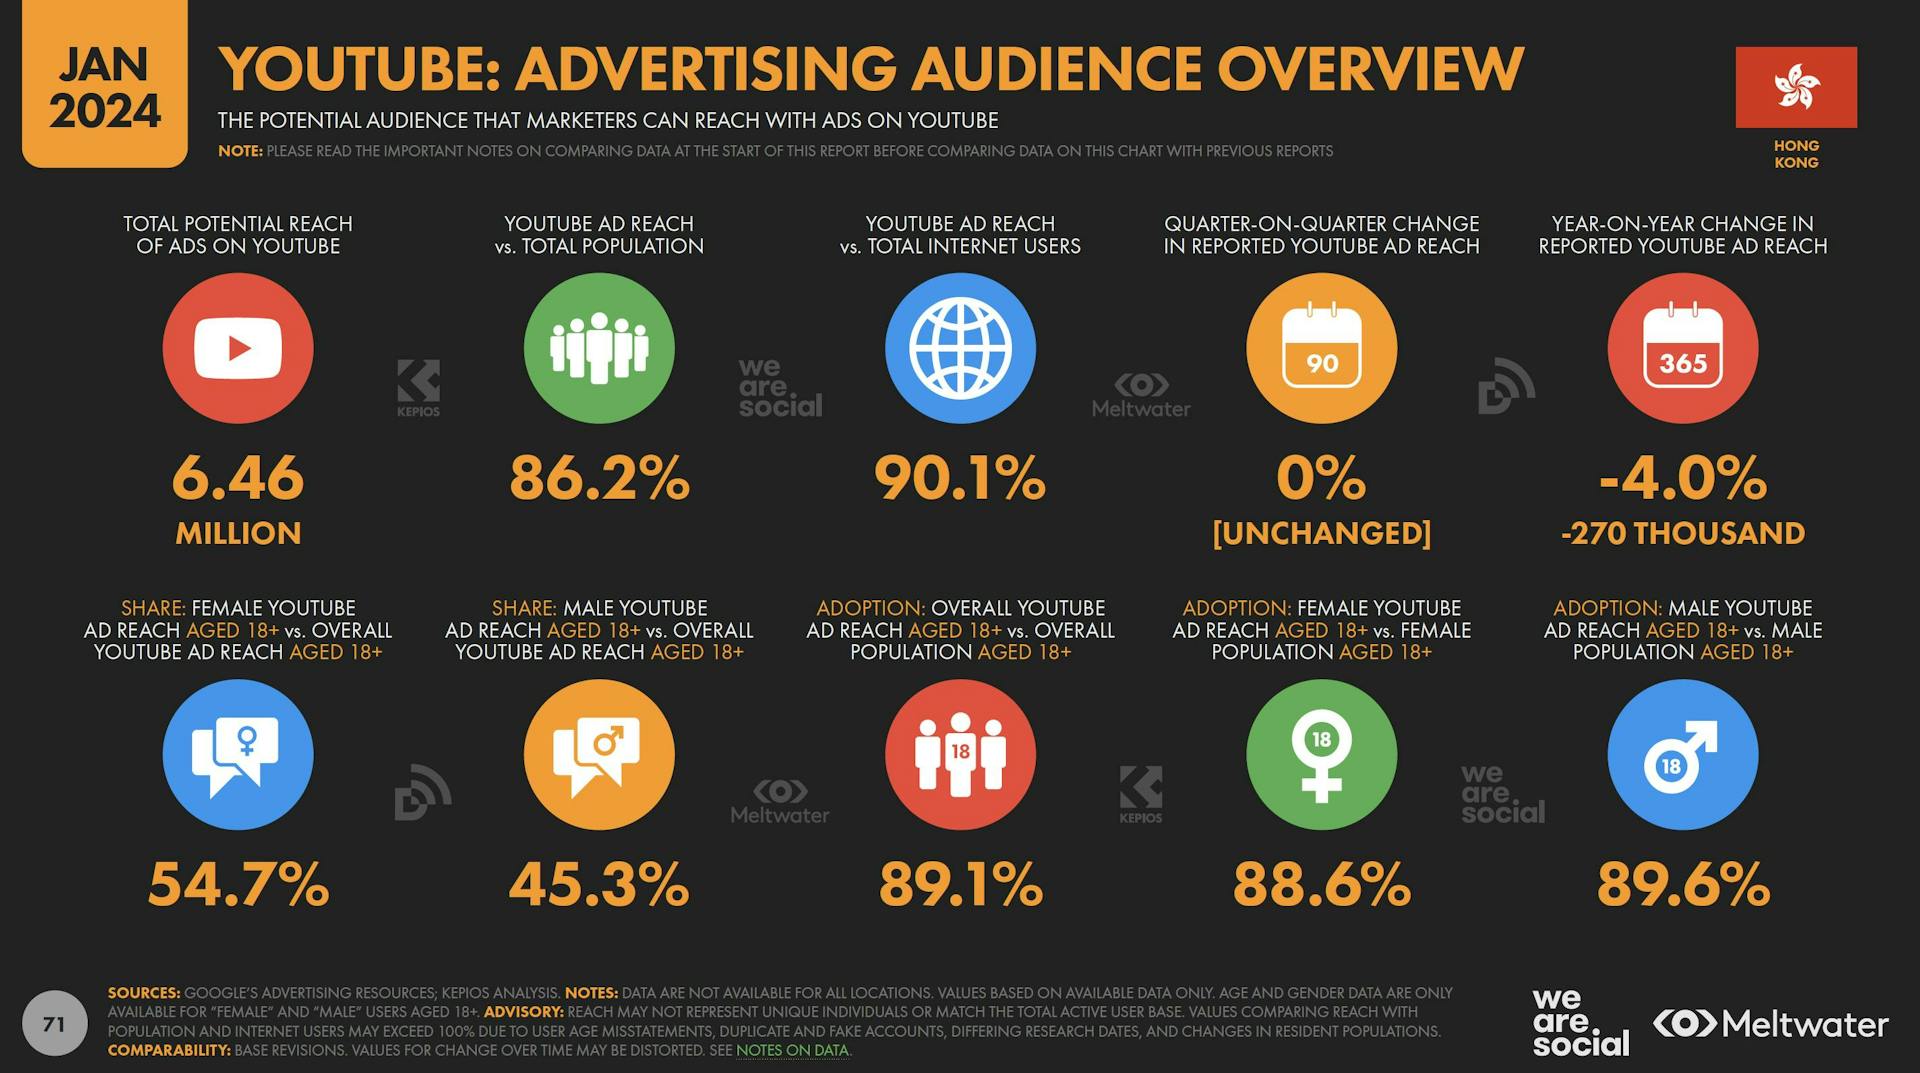 YouTube advertising audience overview based on Global Digital Report 2024 for Hong Kong